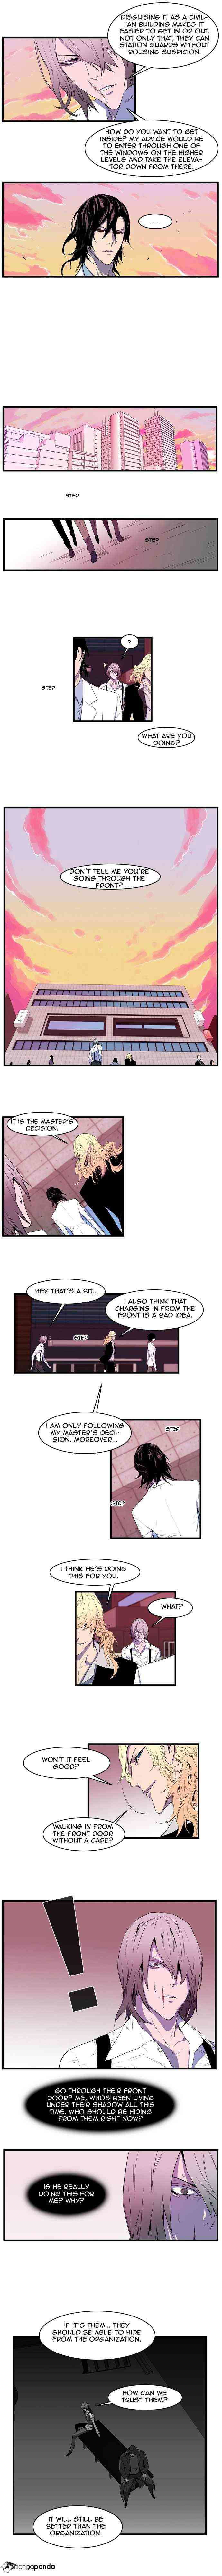 Noblesse Chapter 83 page 3